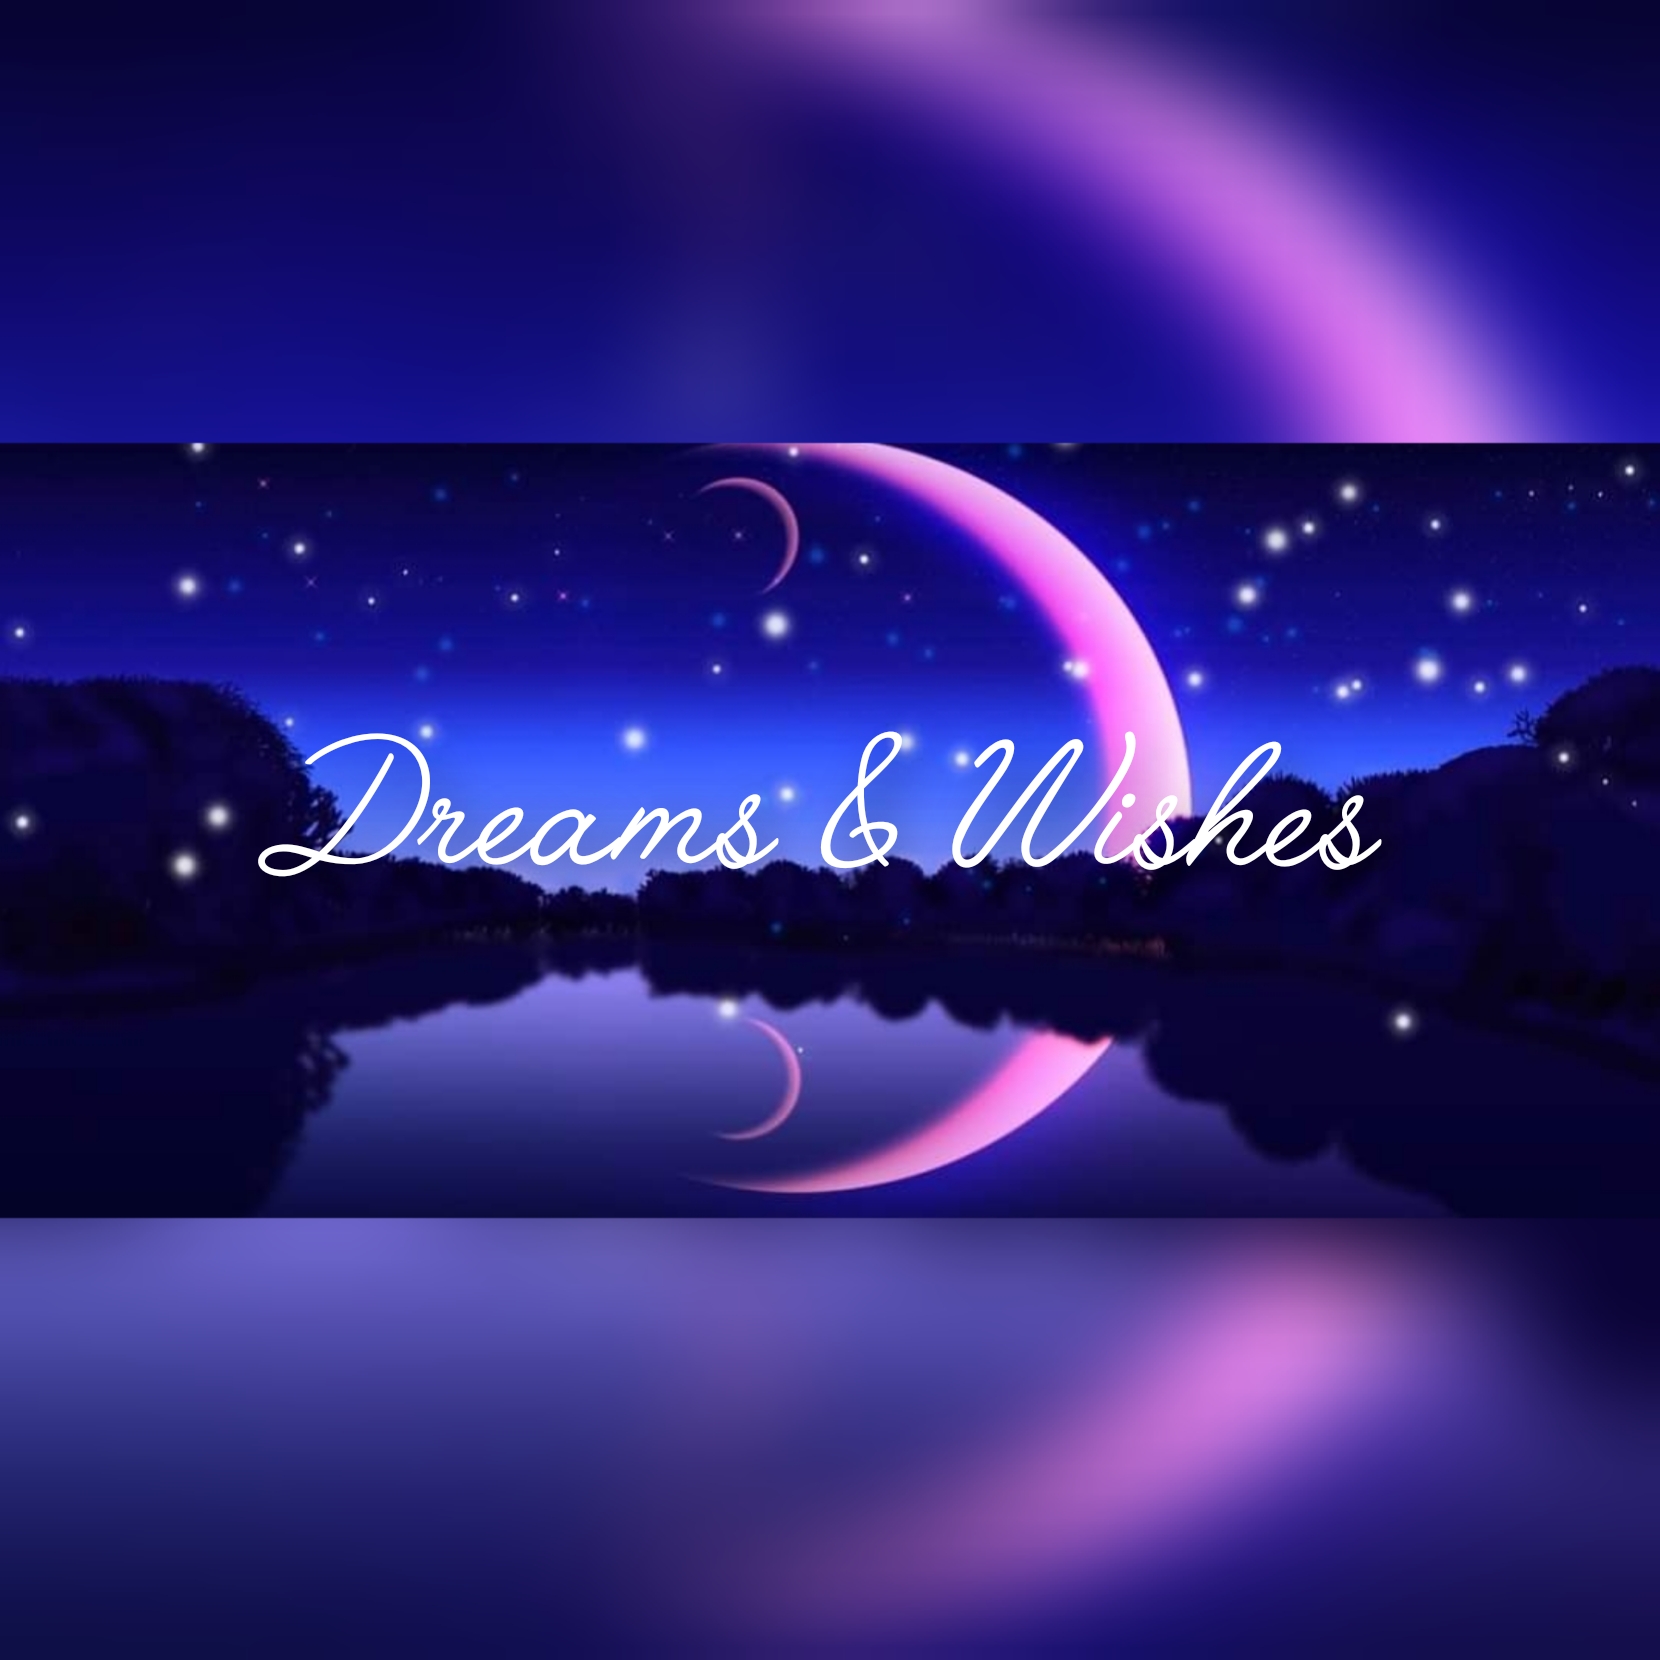 Dreams & Wishes